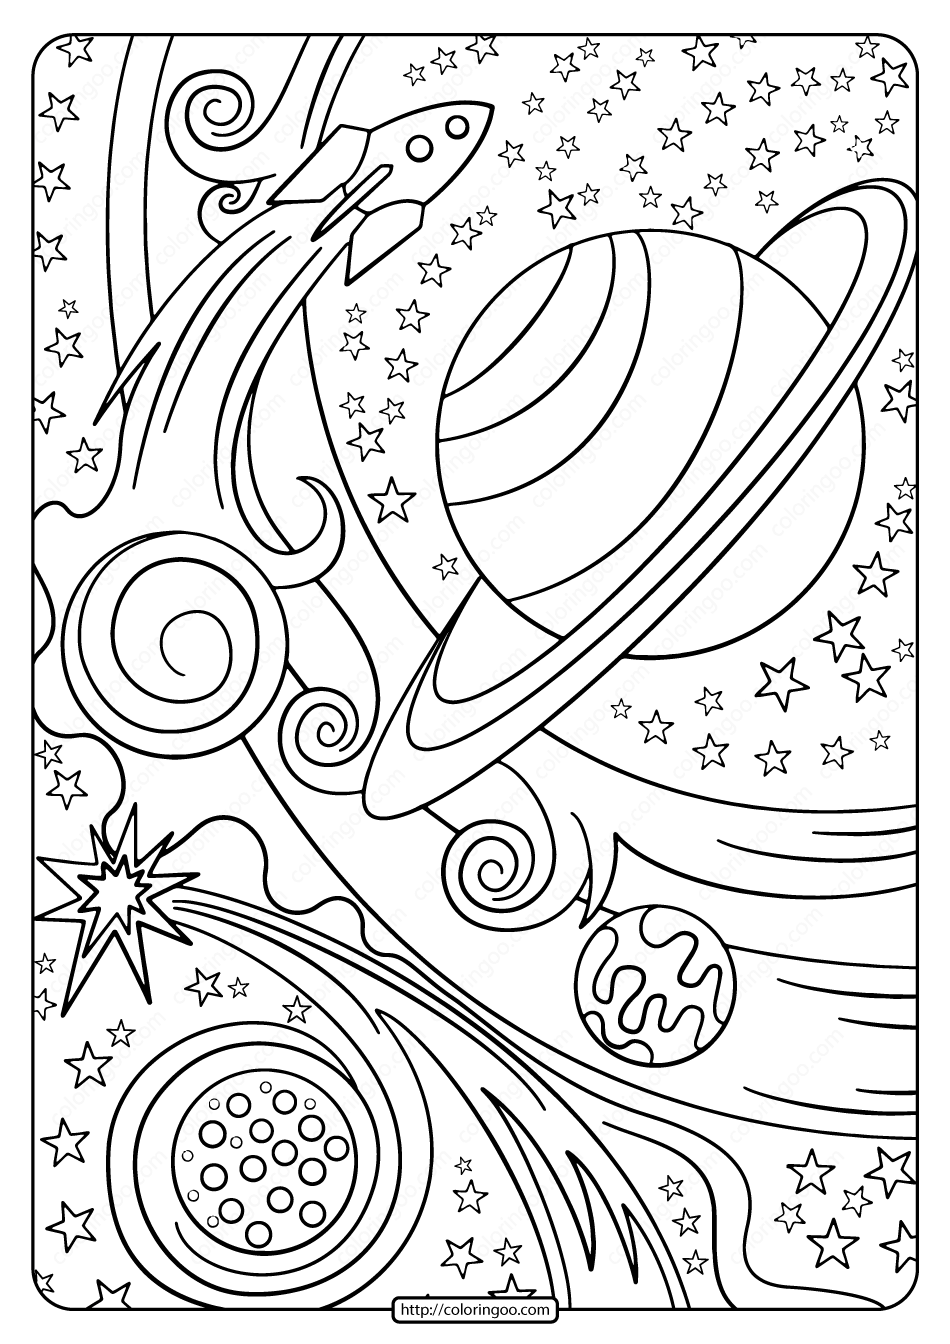 Free Printable Rocket and Pdf Coloring Page Space coloring